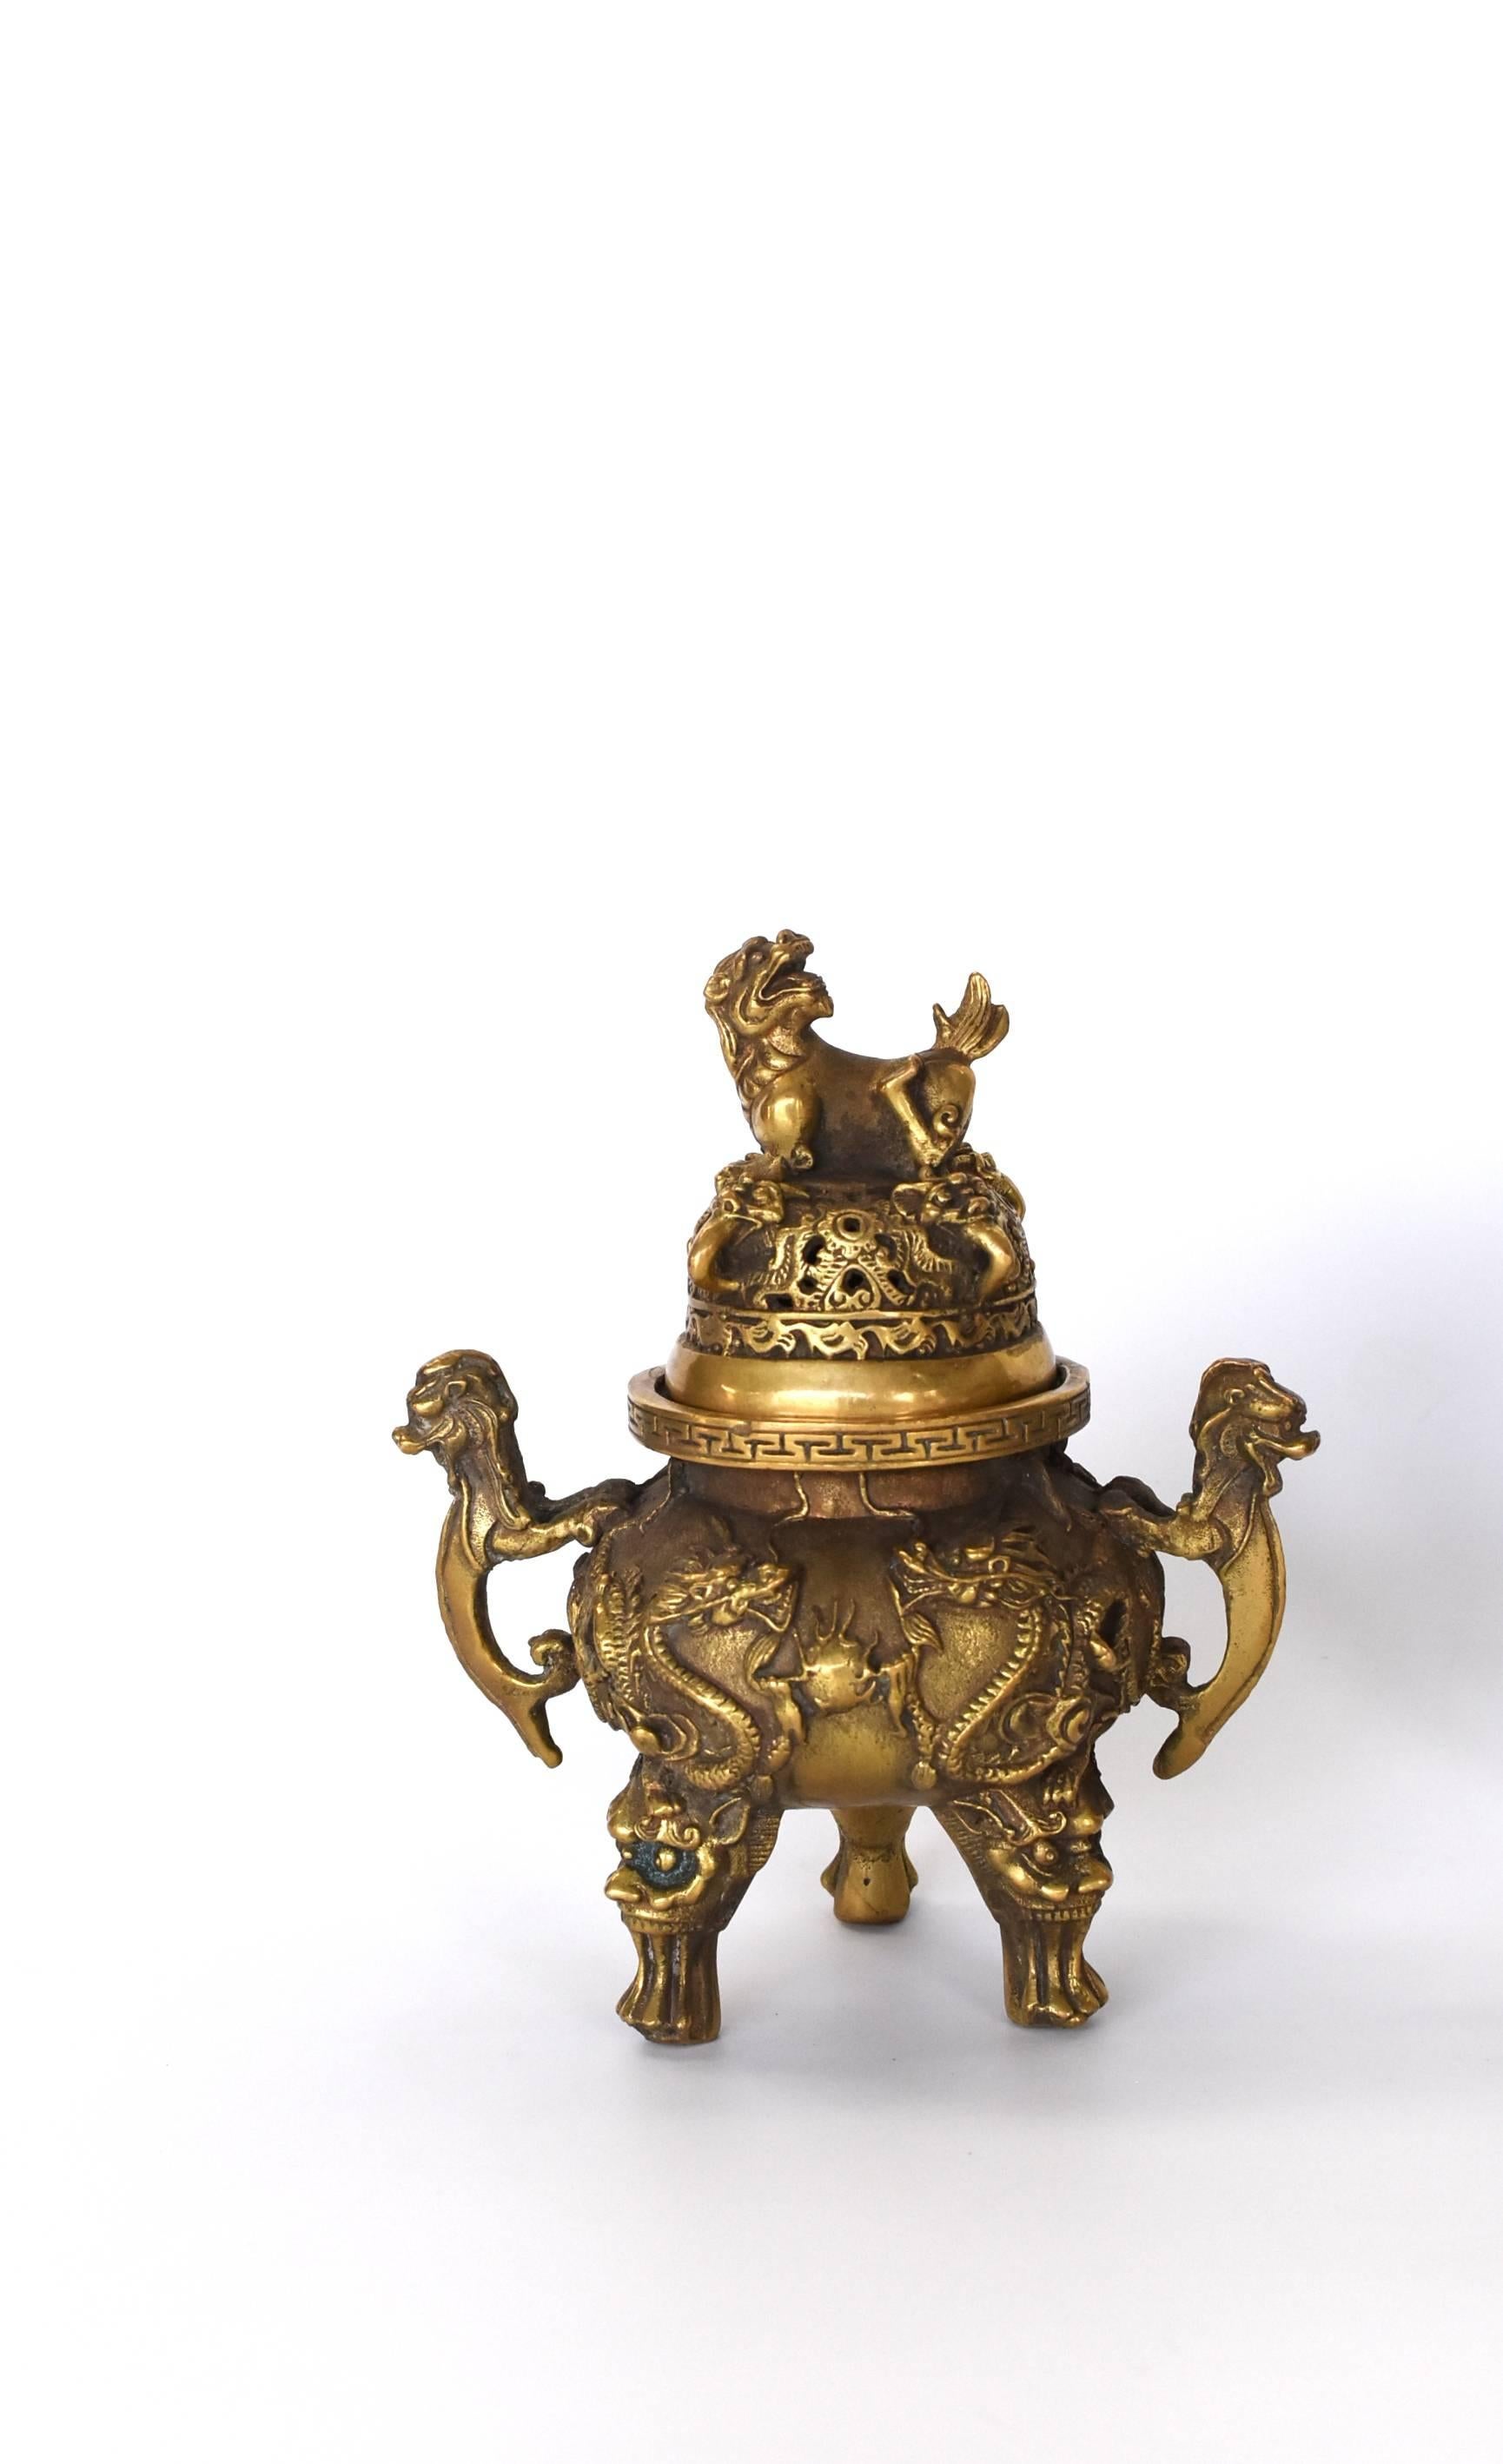 Exquisite incense burner features dragons all-over. Double dragons surrounding fire balls symbolize the vitality of life. Single dragon finial symbolizes leadership. Three mythical ox like creatures form the legs of the burner. Handles feature a